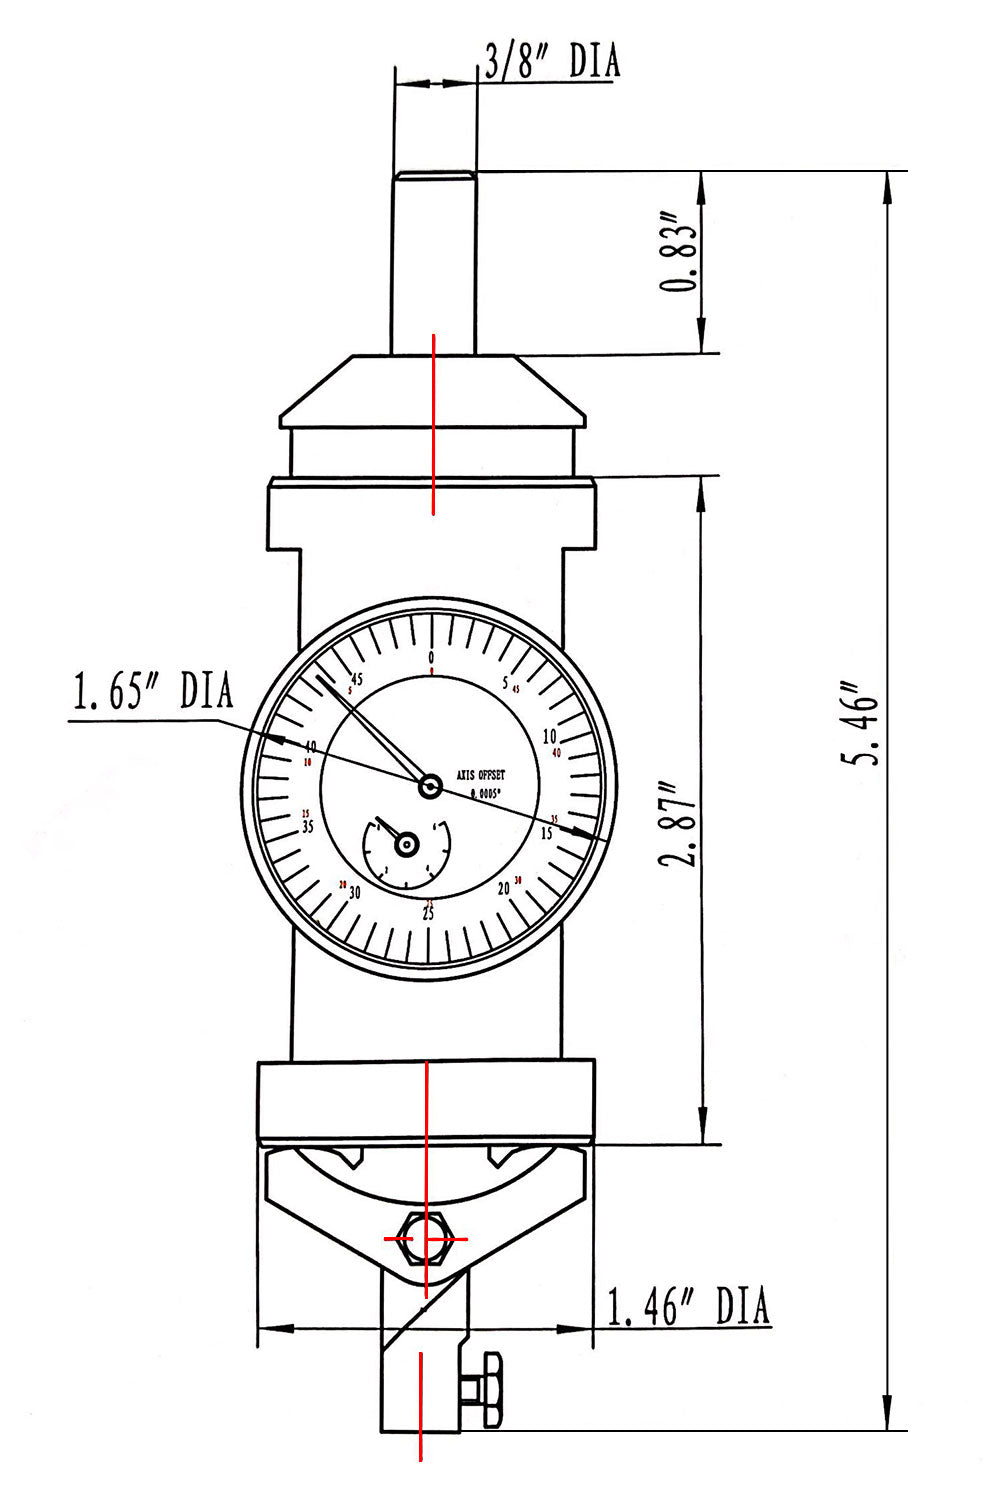 Diagram of JD21-0001 and JD21-0003